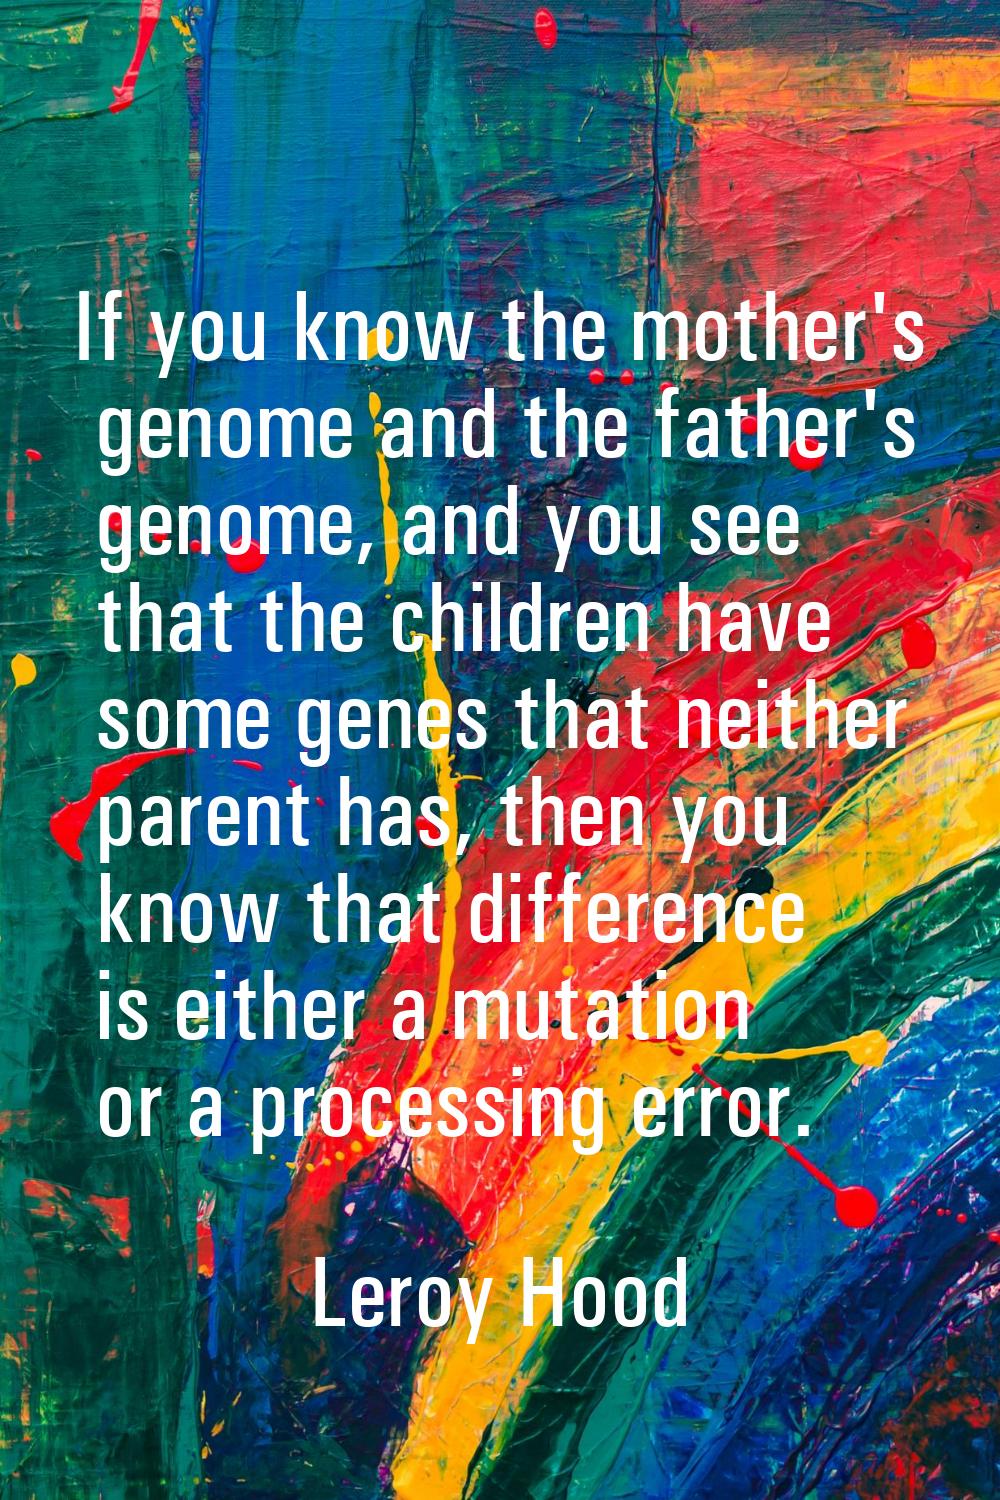 If you know the mother's genome and the father's genome, and you see that the children have some ge